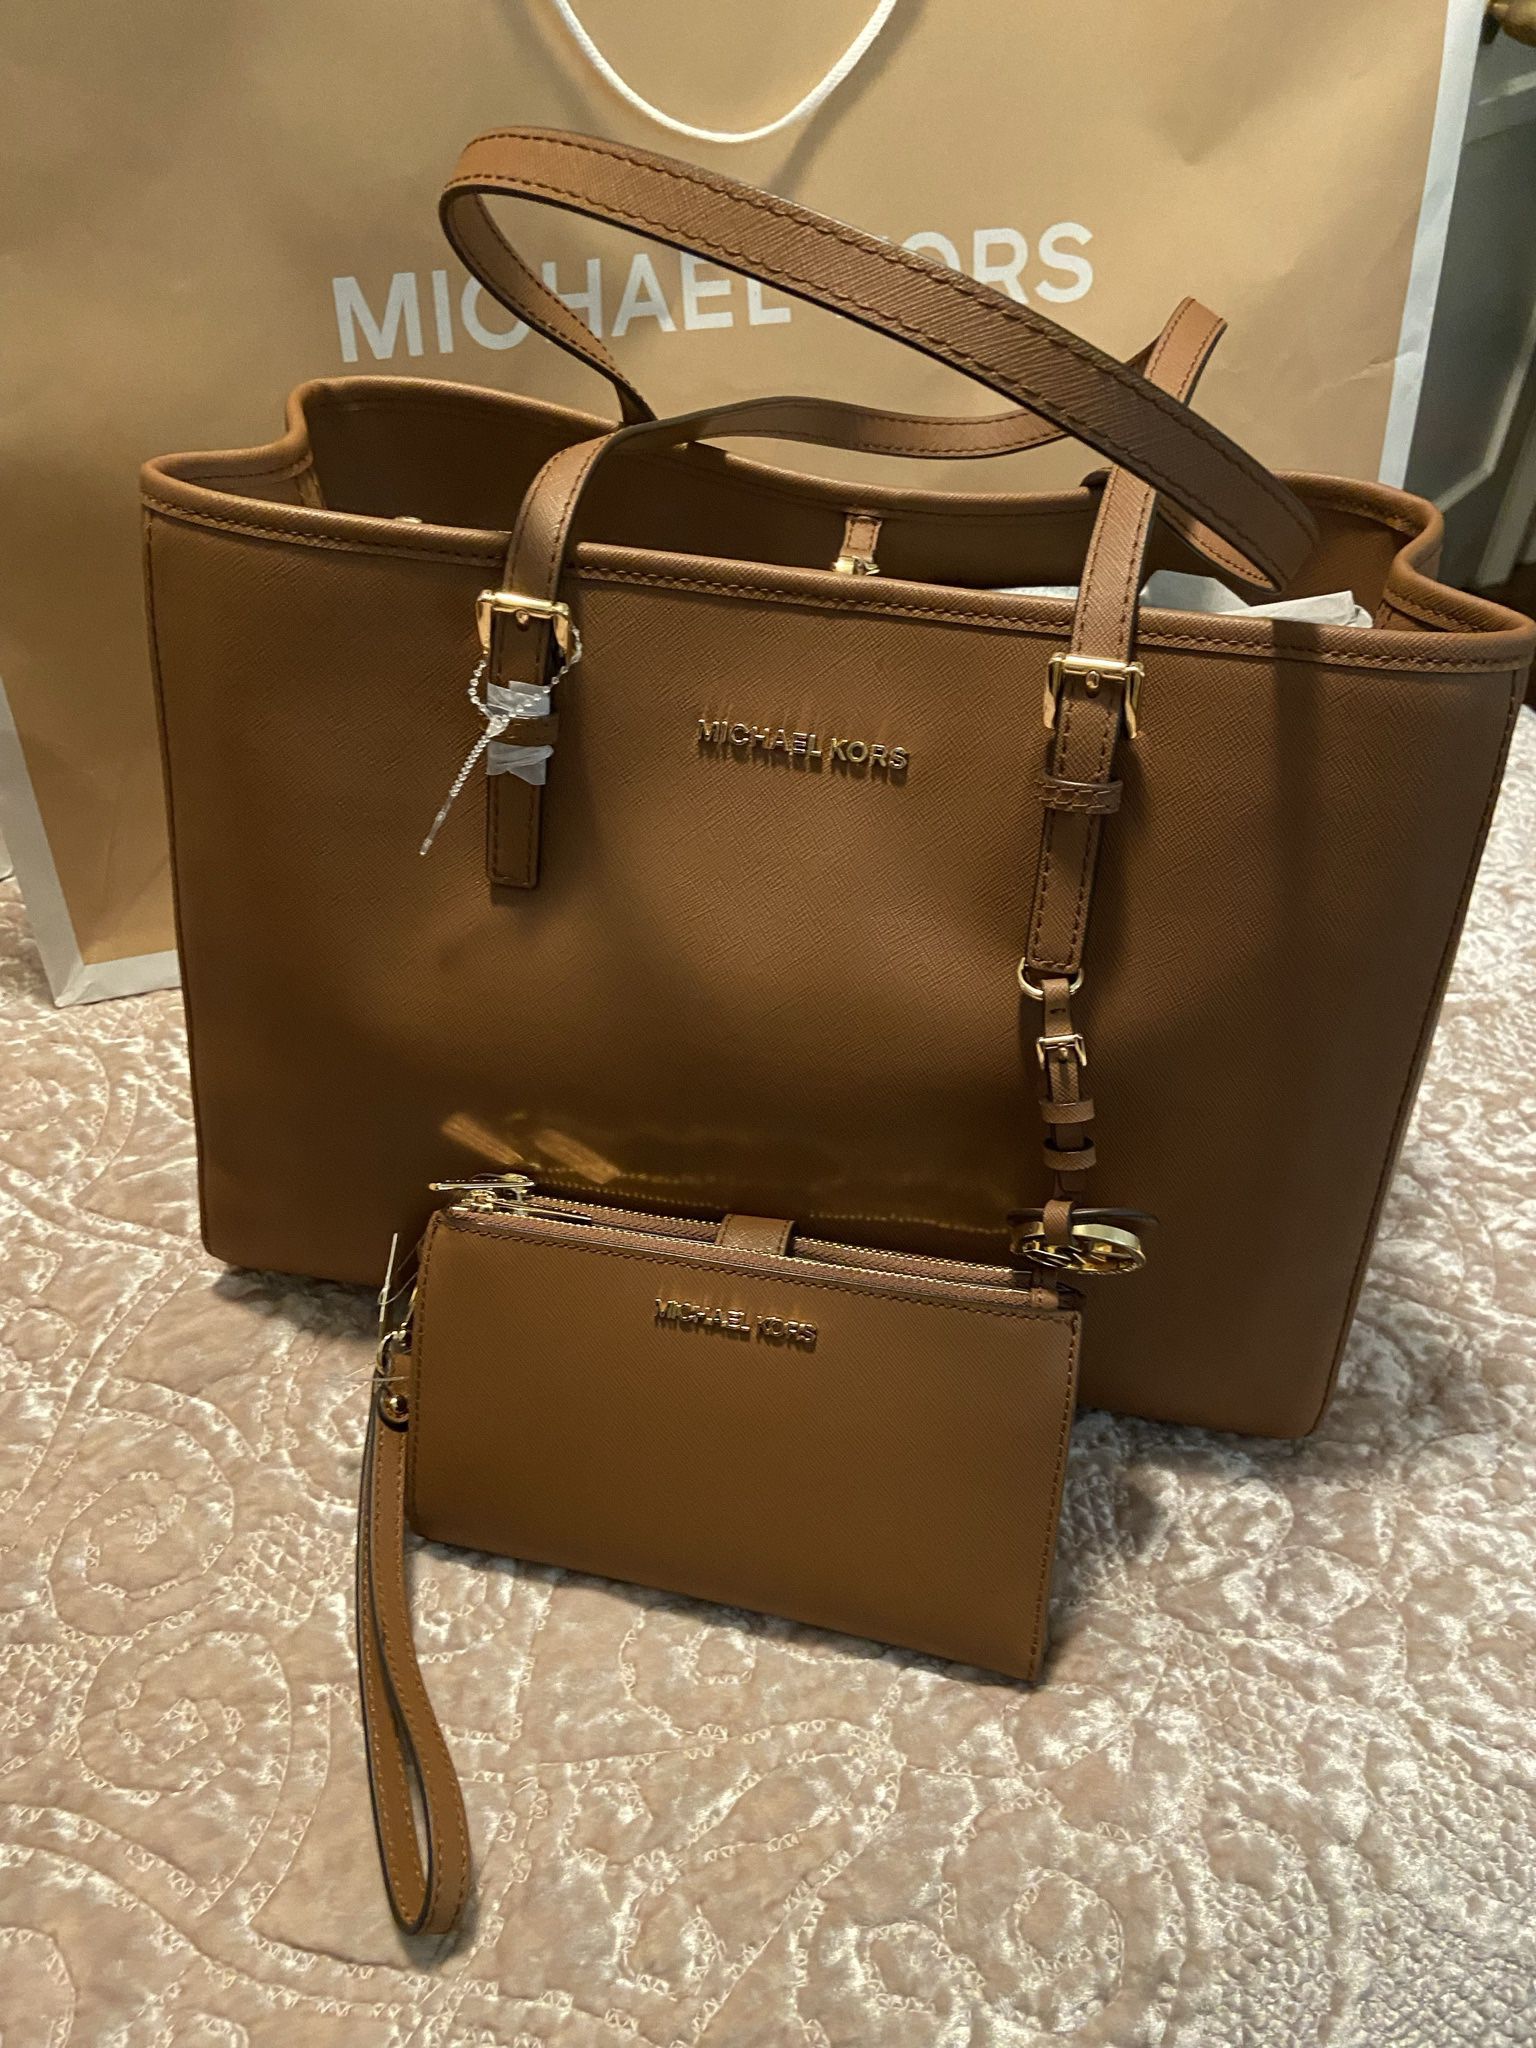 New Michael Kors Large Tote Bag And Double Zipper Wallet for